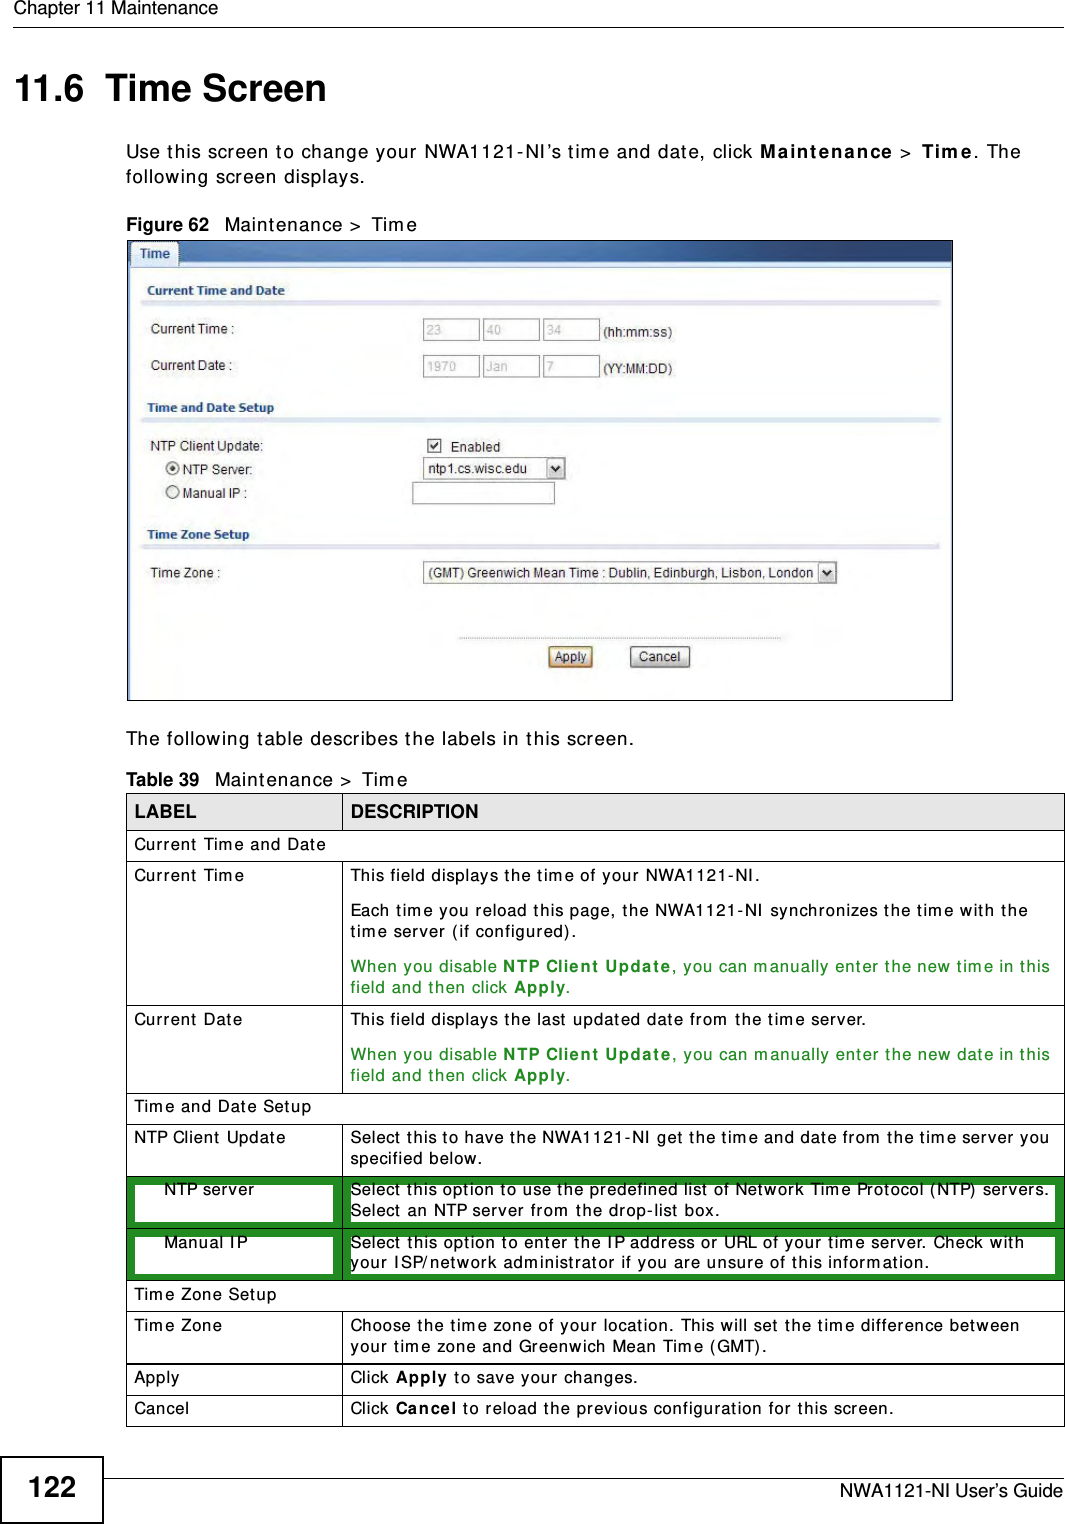 Chapter 11 MaintenanceNWA1121-NI User’s Guide12211.6  Time ScreenUse this screen to change your NWA1121-NI’s time and date, click Maintenance &gt; Time. The following screen displays.Figure 62   Maintenance &gt; TimeThe following table describes the labels in this screen.Table 39   Maintenance &gt; TimeLABEL DESCRIPTIONCurrent Time and DateCurrent Time This field displays the time of your NWA1121-NI.Each time you reload this page, the NWA1121-NI synchronizes the time with the time server (if configured).When you disable NTP Client Update, you can manually enter the new time in this field and then click Apply. Current Date This field displays the last updated date from the time server.When you disable NTP Client Update, you can manually enter the new date in this field and then click Apply. Time and Date SetupNTP Client Update Select this to have the NWA1121-NI get the time and date from the time server you specified below.NTP server Select this option to use the predefined list of Network Time Protocol (NTP) servers. Select an NTP server from the drop-list box.Manual IP Select this option to enter the IP address or URL of your time server. Check with your ISP/network administrator if you are unsure of this information.Time Zone SetupTime Zone Choose the time zone of your location. This will set the time difference between your time zone and Greenwich Mean Time (GMT). Apply Click Apply to save your changes.Cancel Click Cancel to reload the previous configuration for this screen.